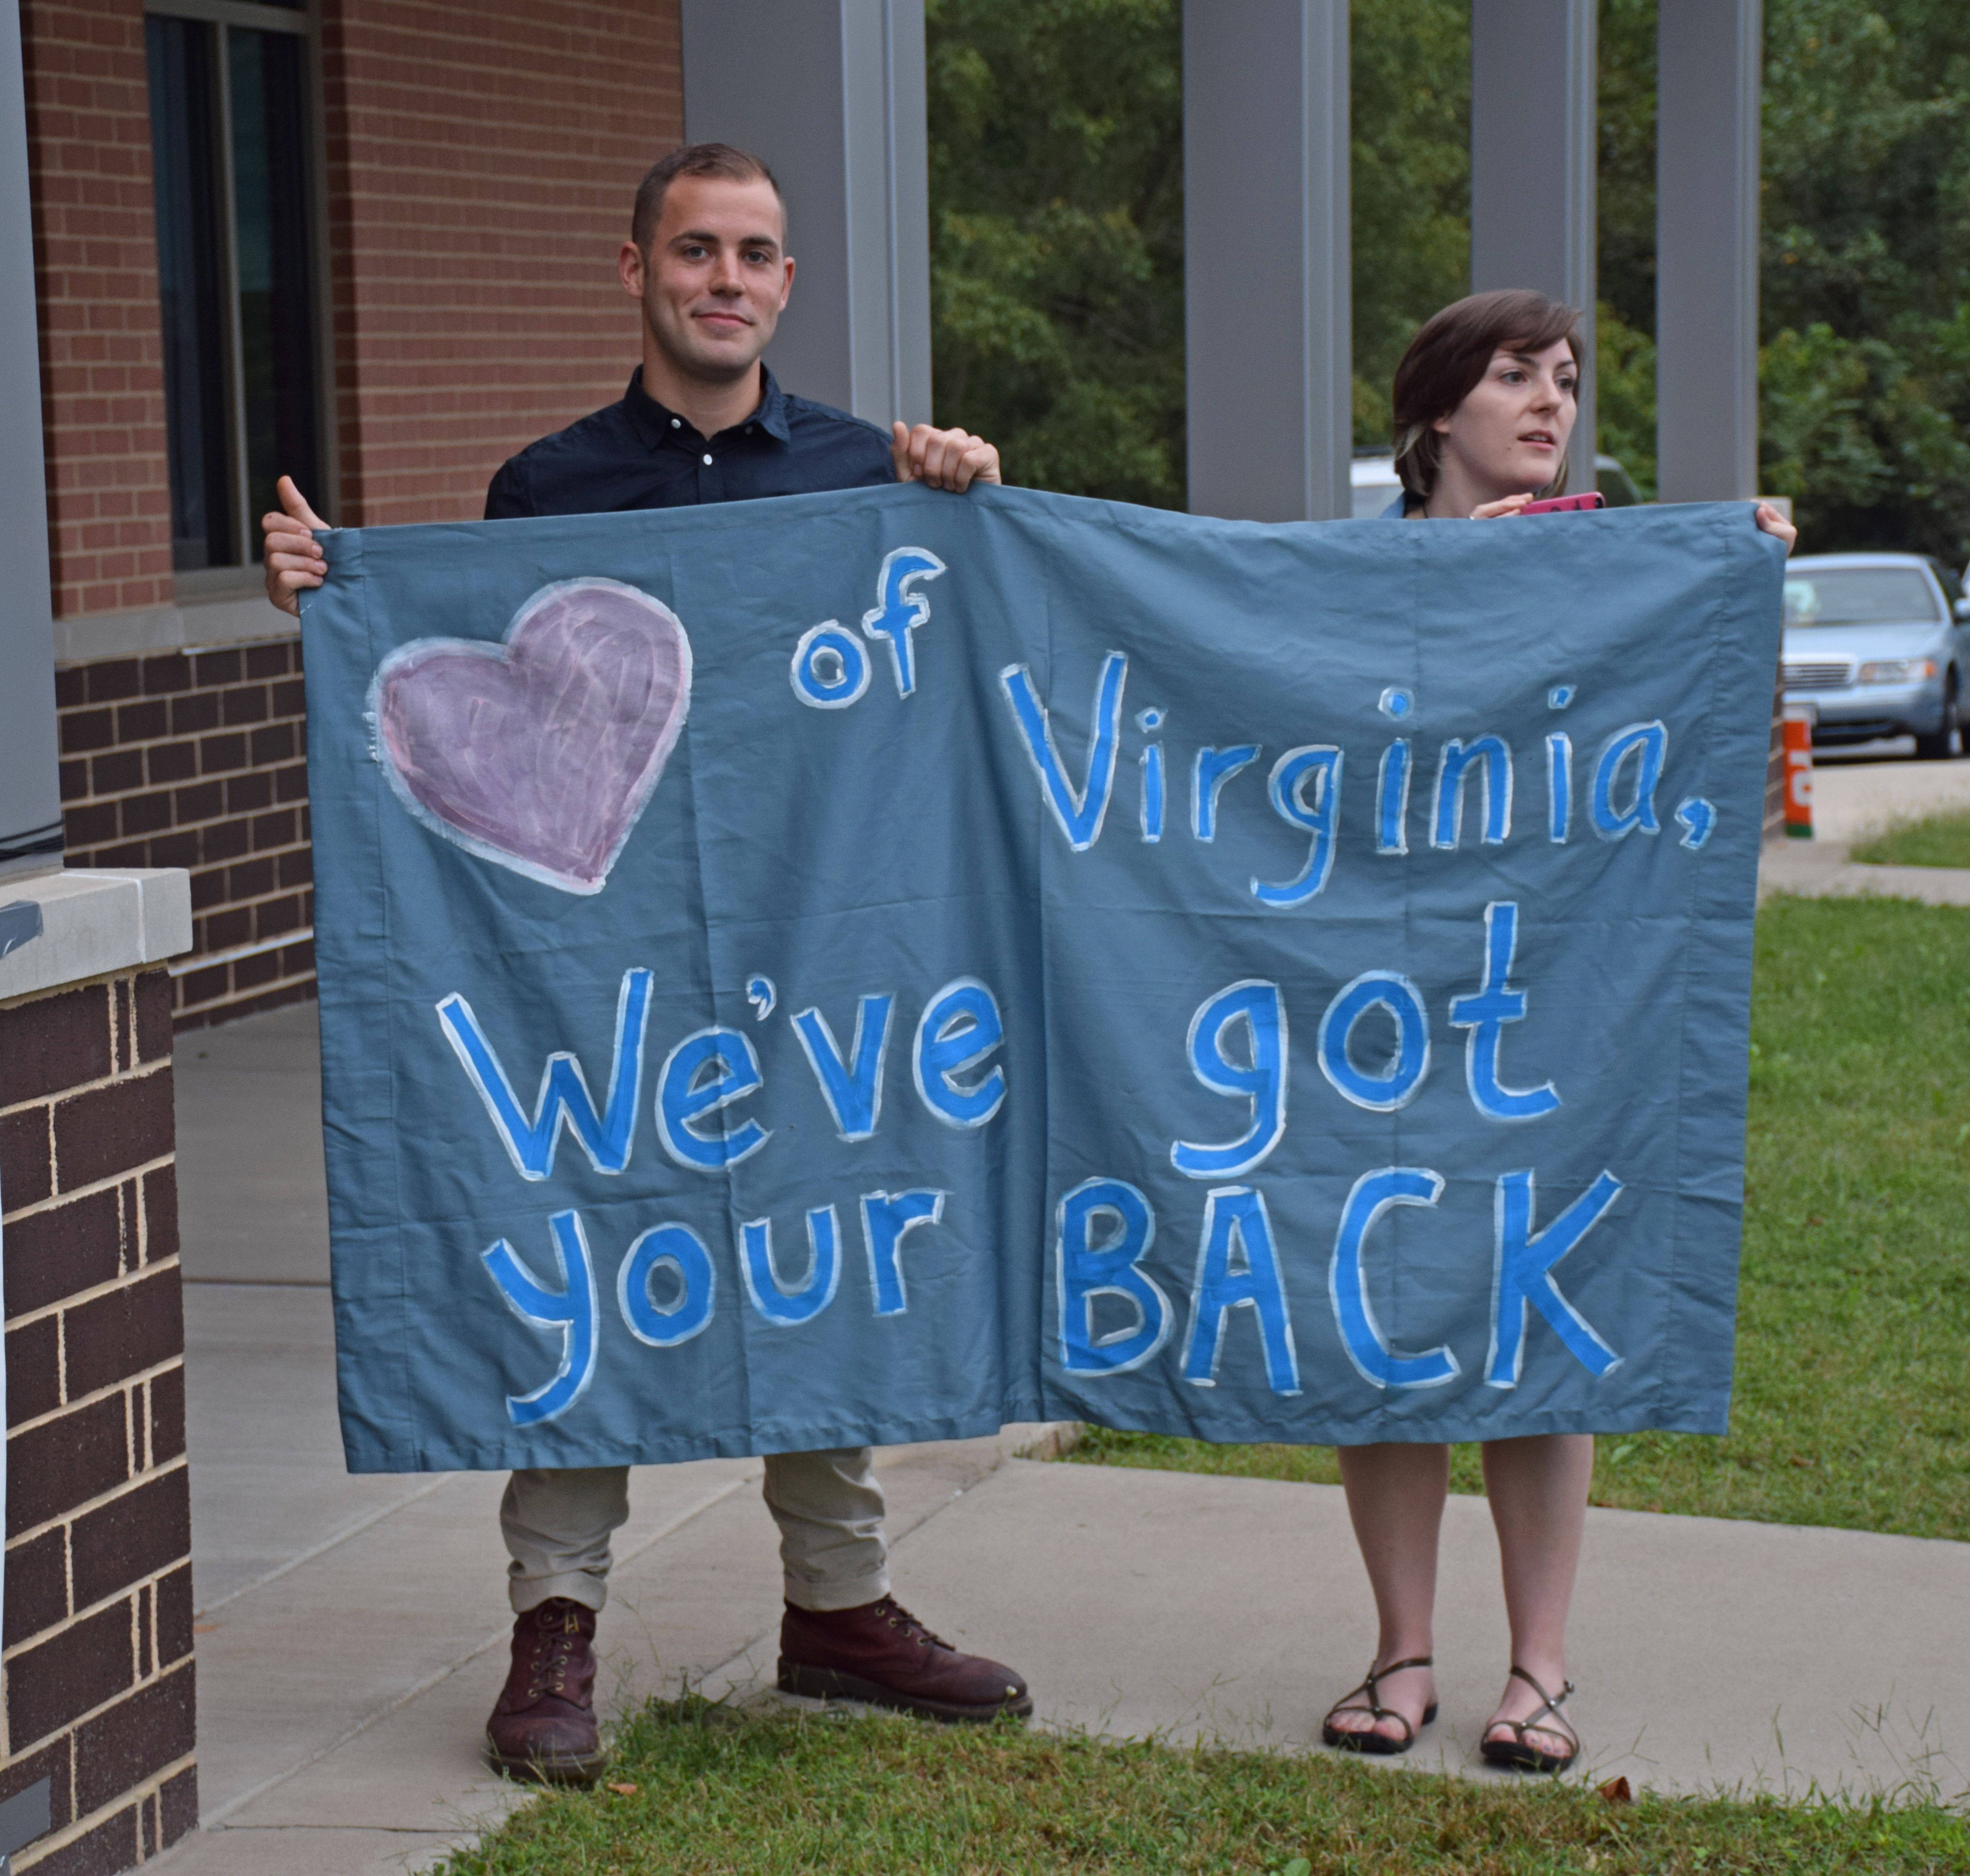 Allies from Richmond hold up a supportive message to Buckingham County: Heart of Virginia, we’ve got your back.”